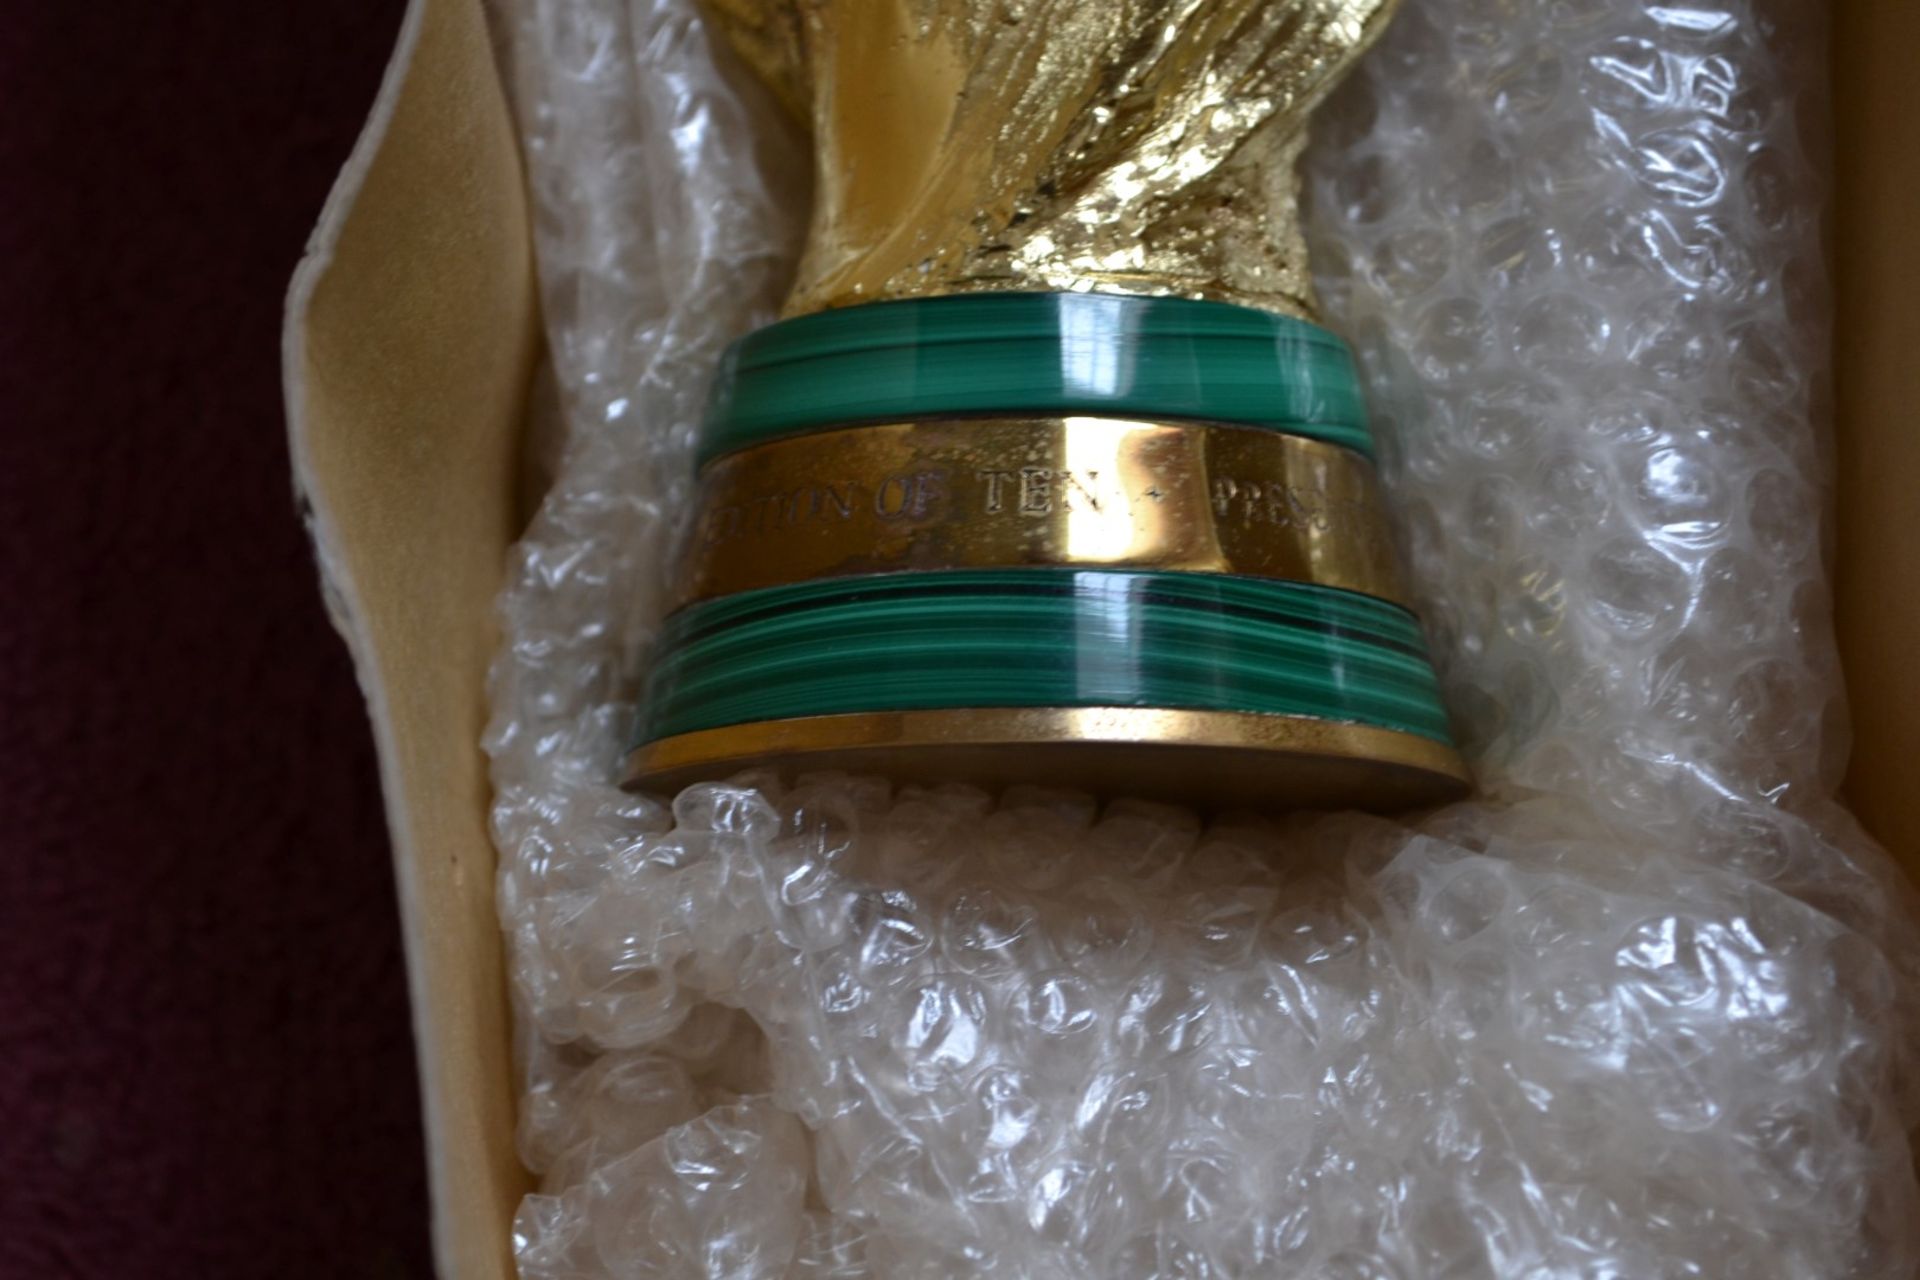 1 x Official World Cup 1:1.3 Scale 27cm Replica By Gerrard & Co. - Gold Plated - No.8 Of Only 10 - Image 14 of 16